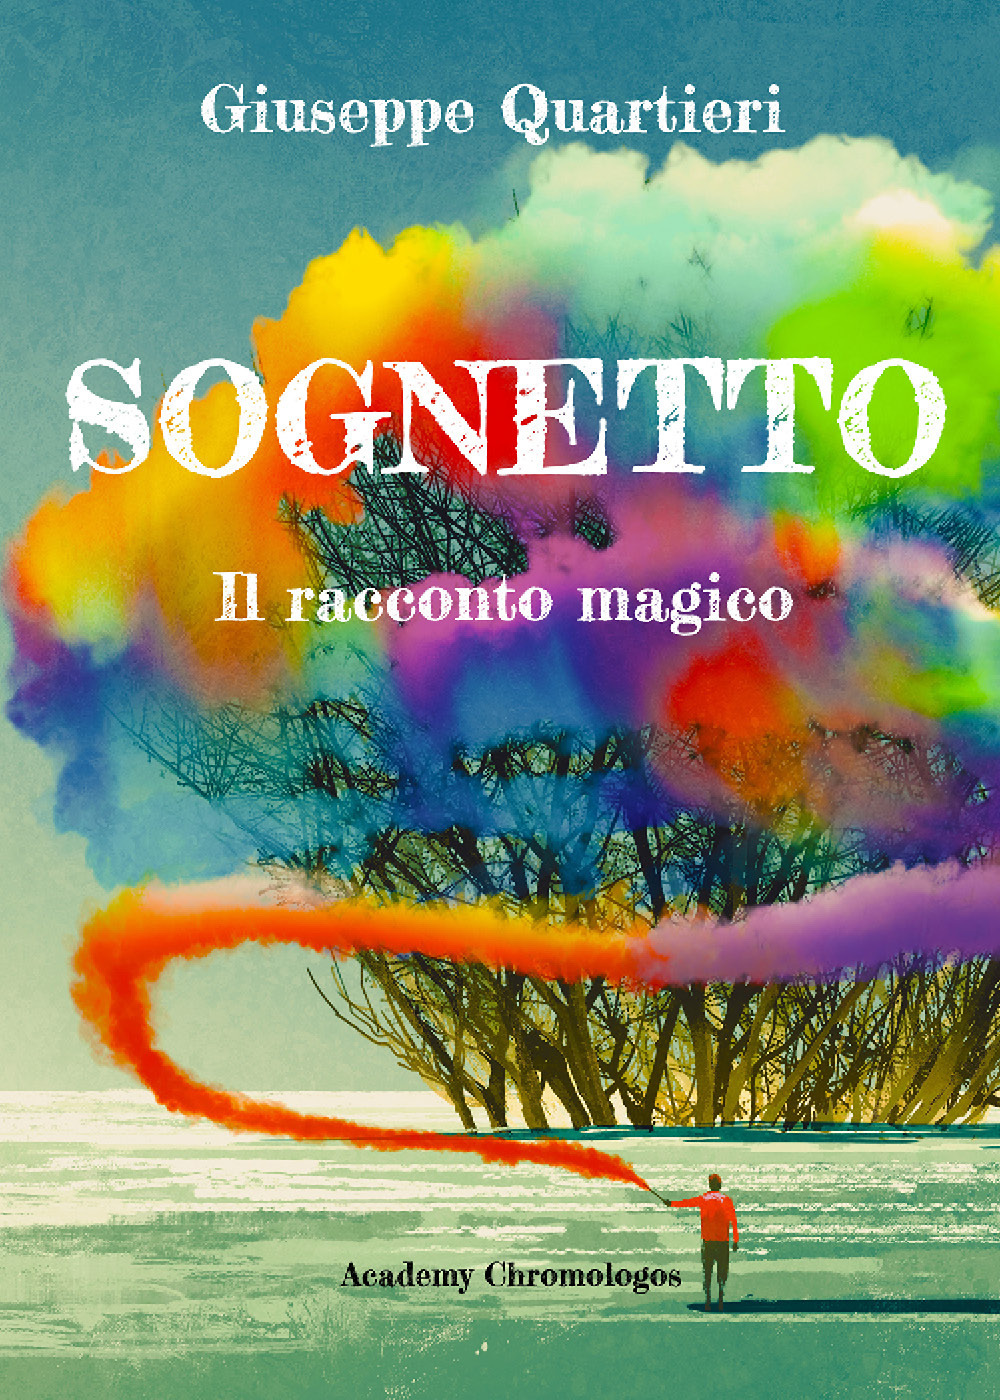 Sognetto